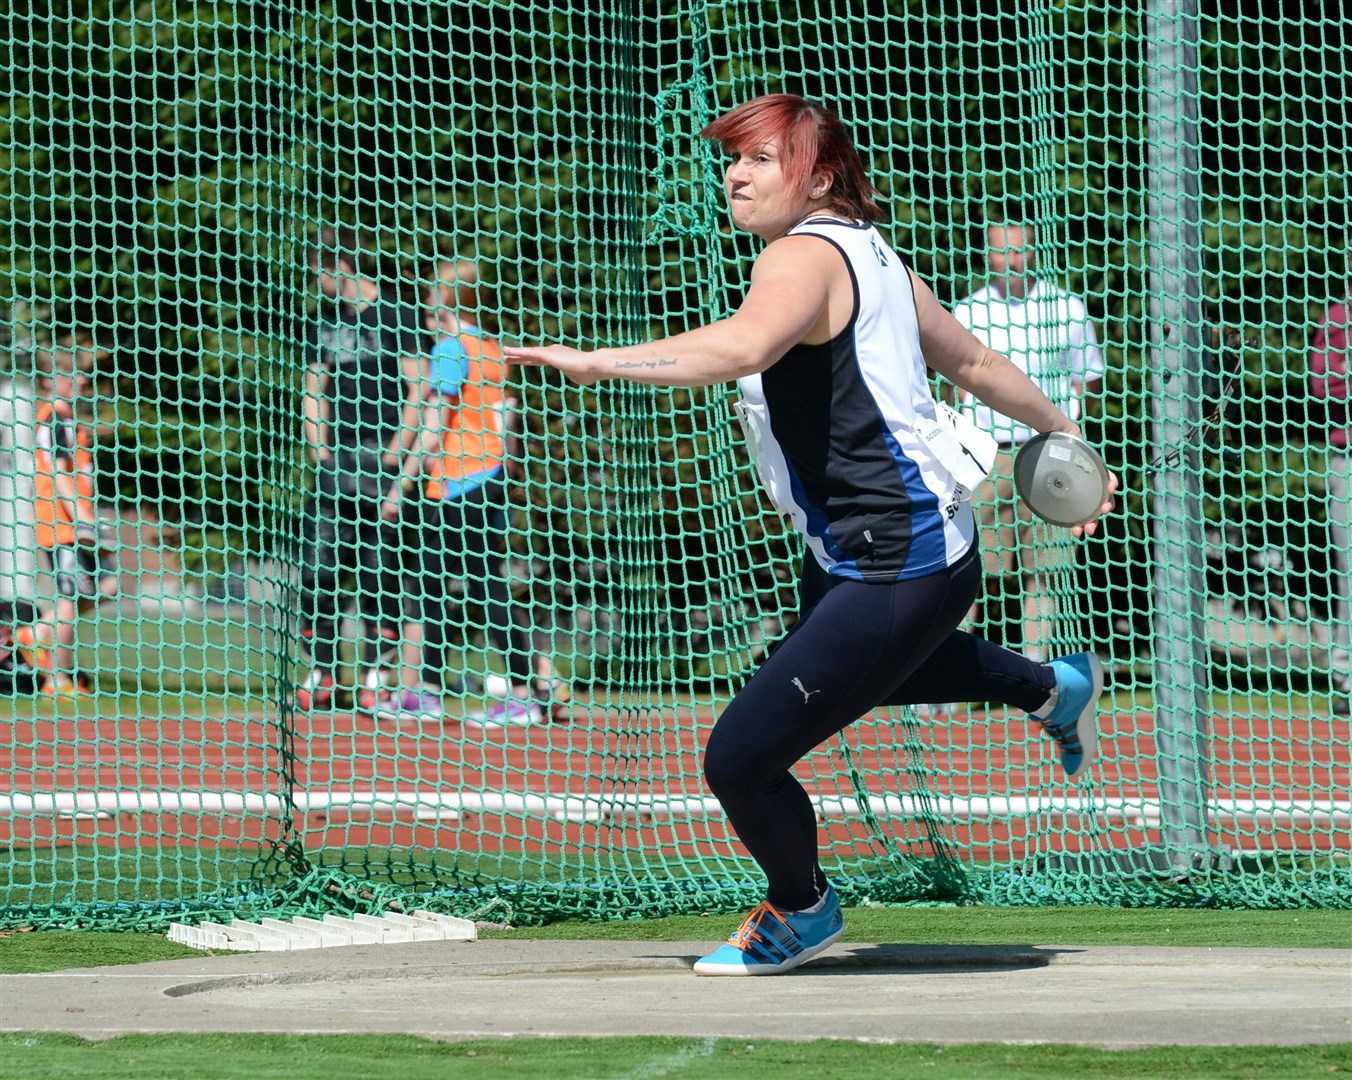 Kirsty Law claimed silver at the UK Athletics Championships last weekend.